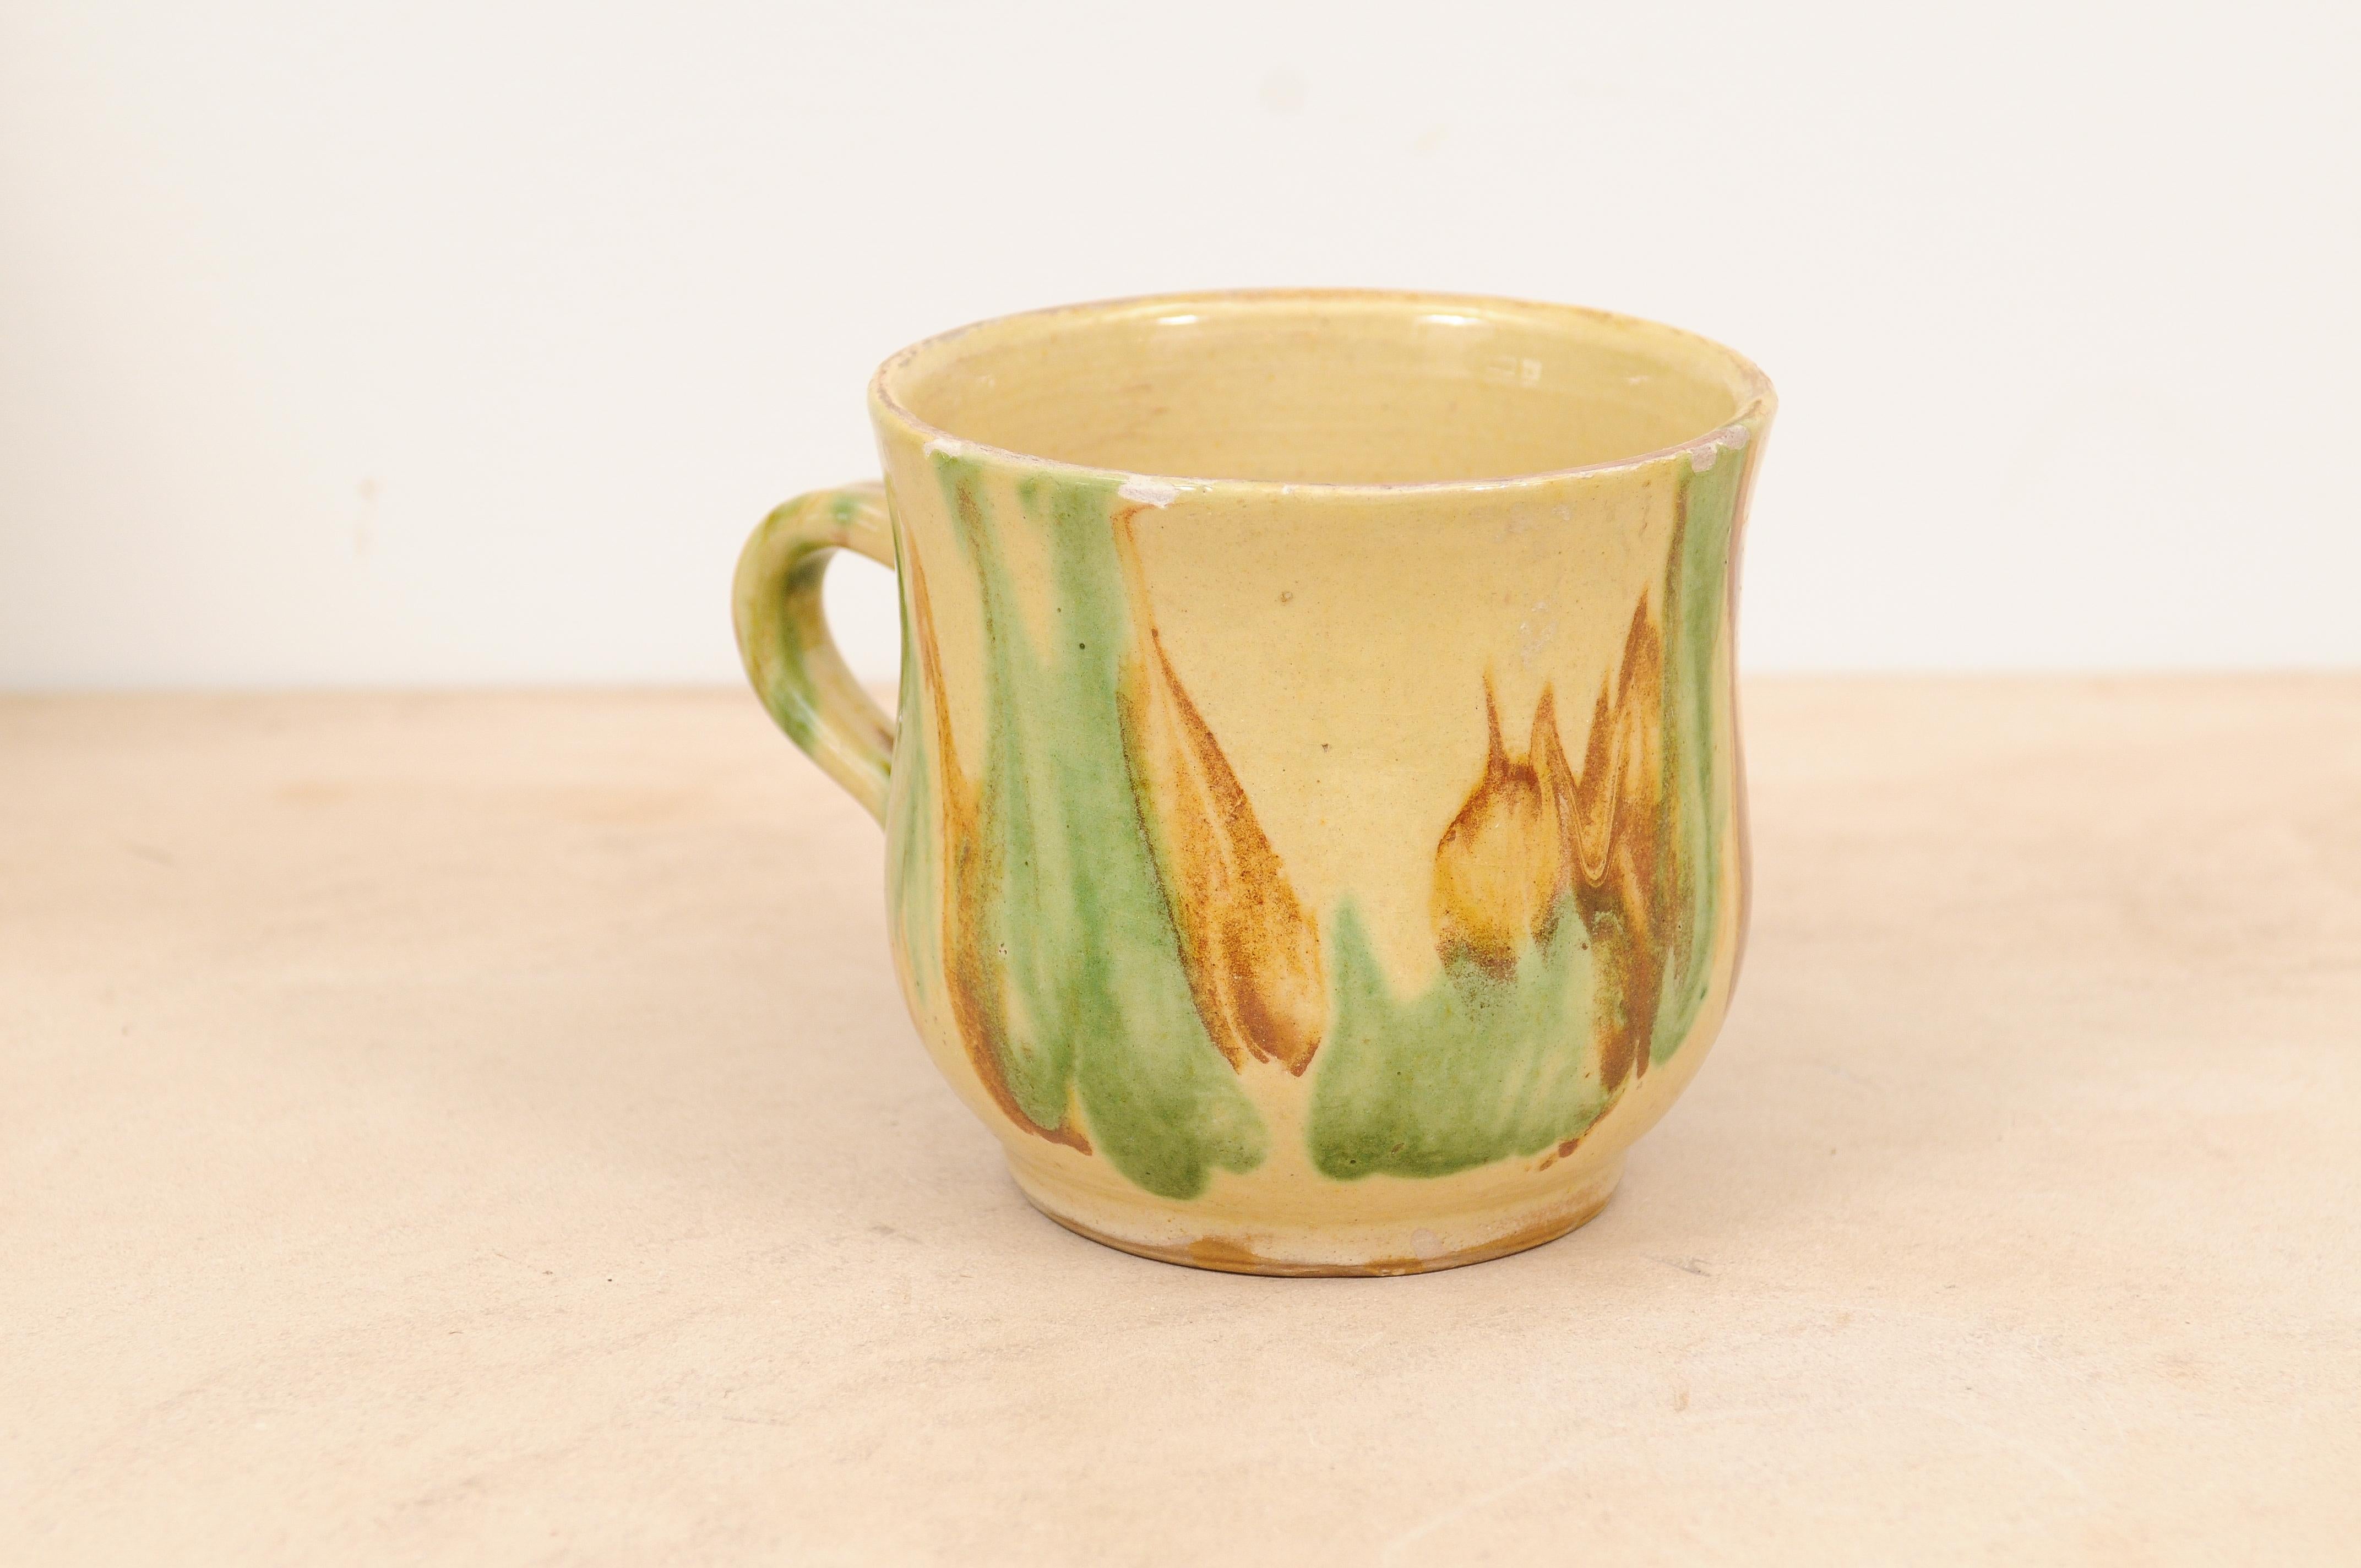 A French pottery mug from the 19th century, with yellow, green and rust glaze. Created in France during the 19th century, this pottery mug features a cylindrical curving body showcasing a yellow ground adorned with green and rust glaze. Presenting a